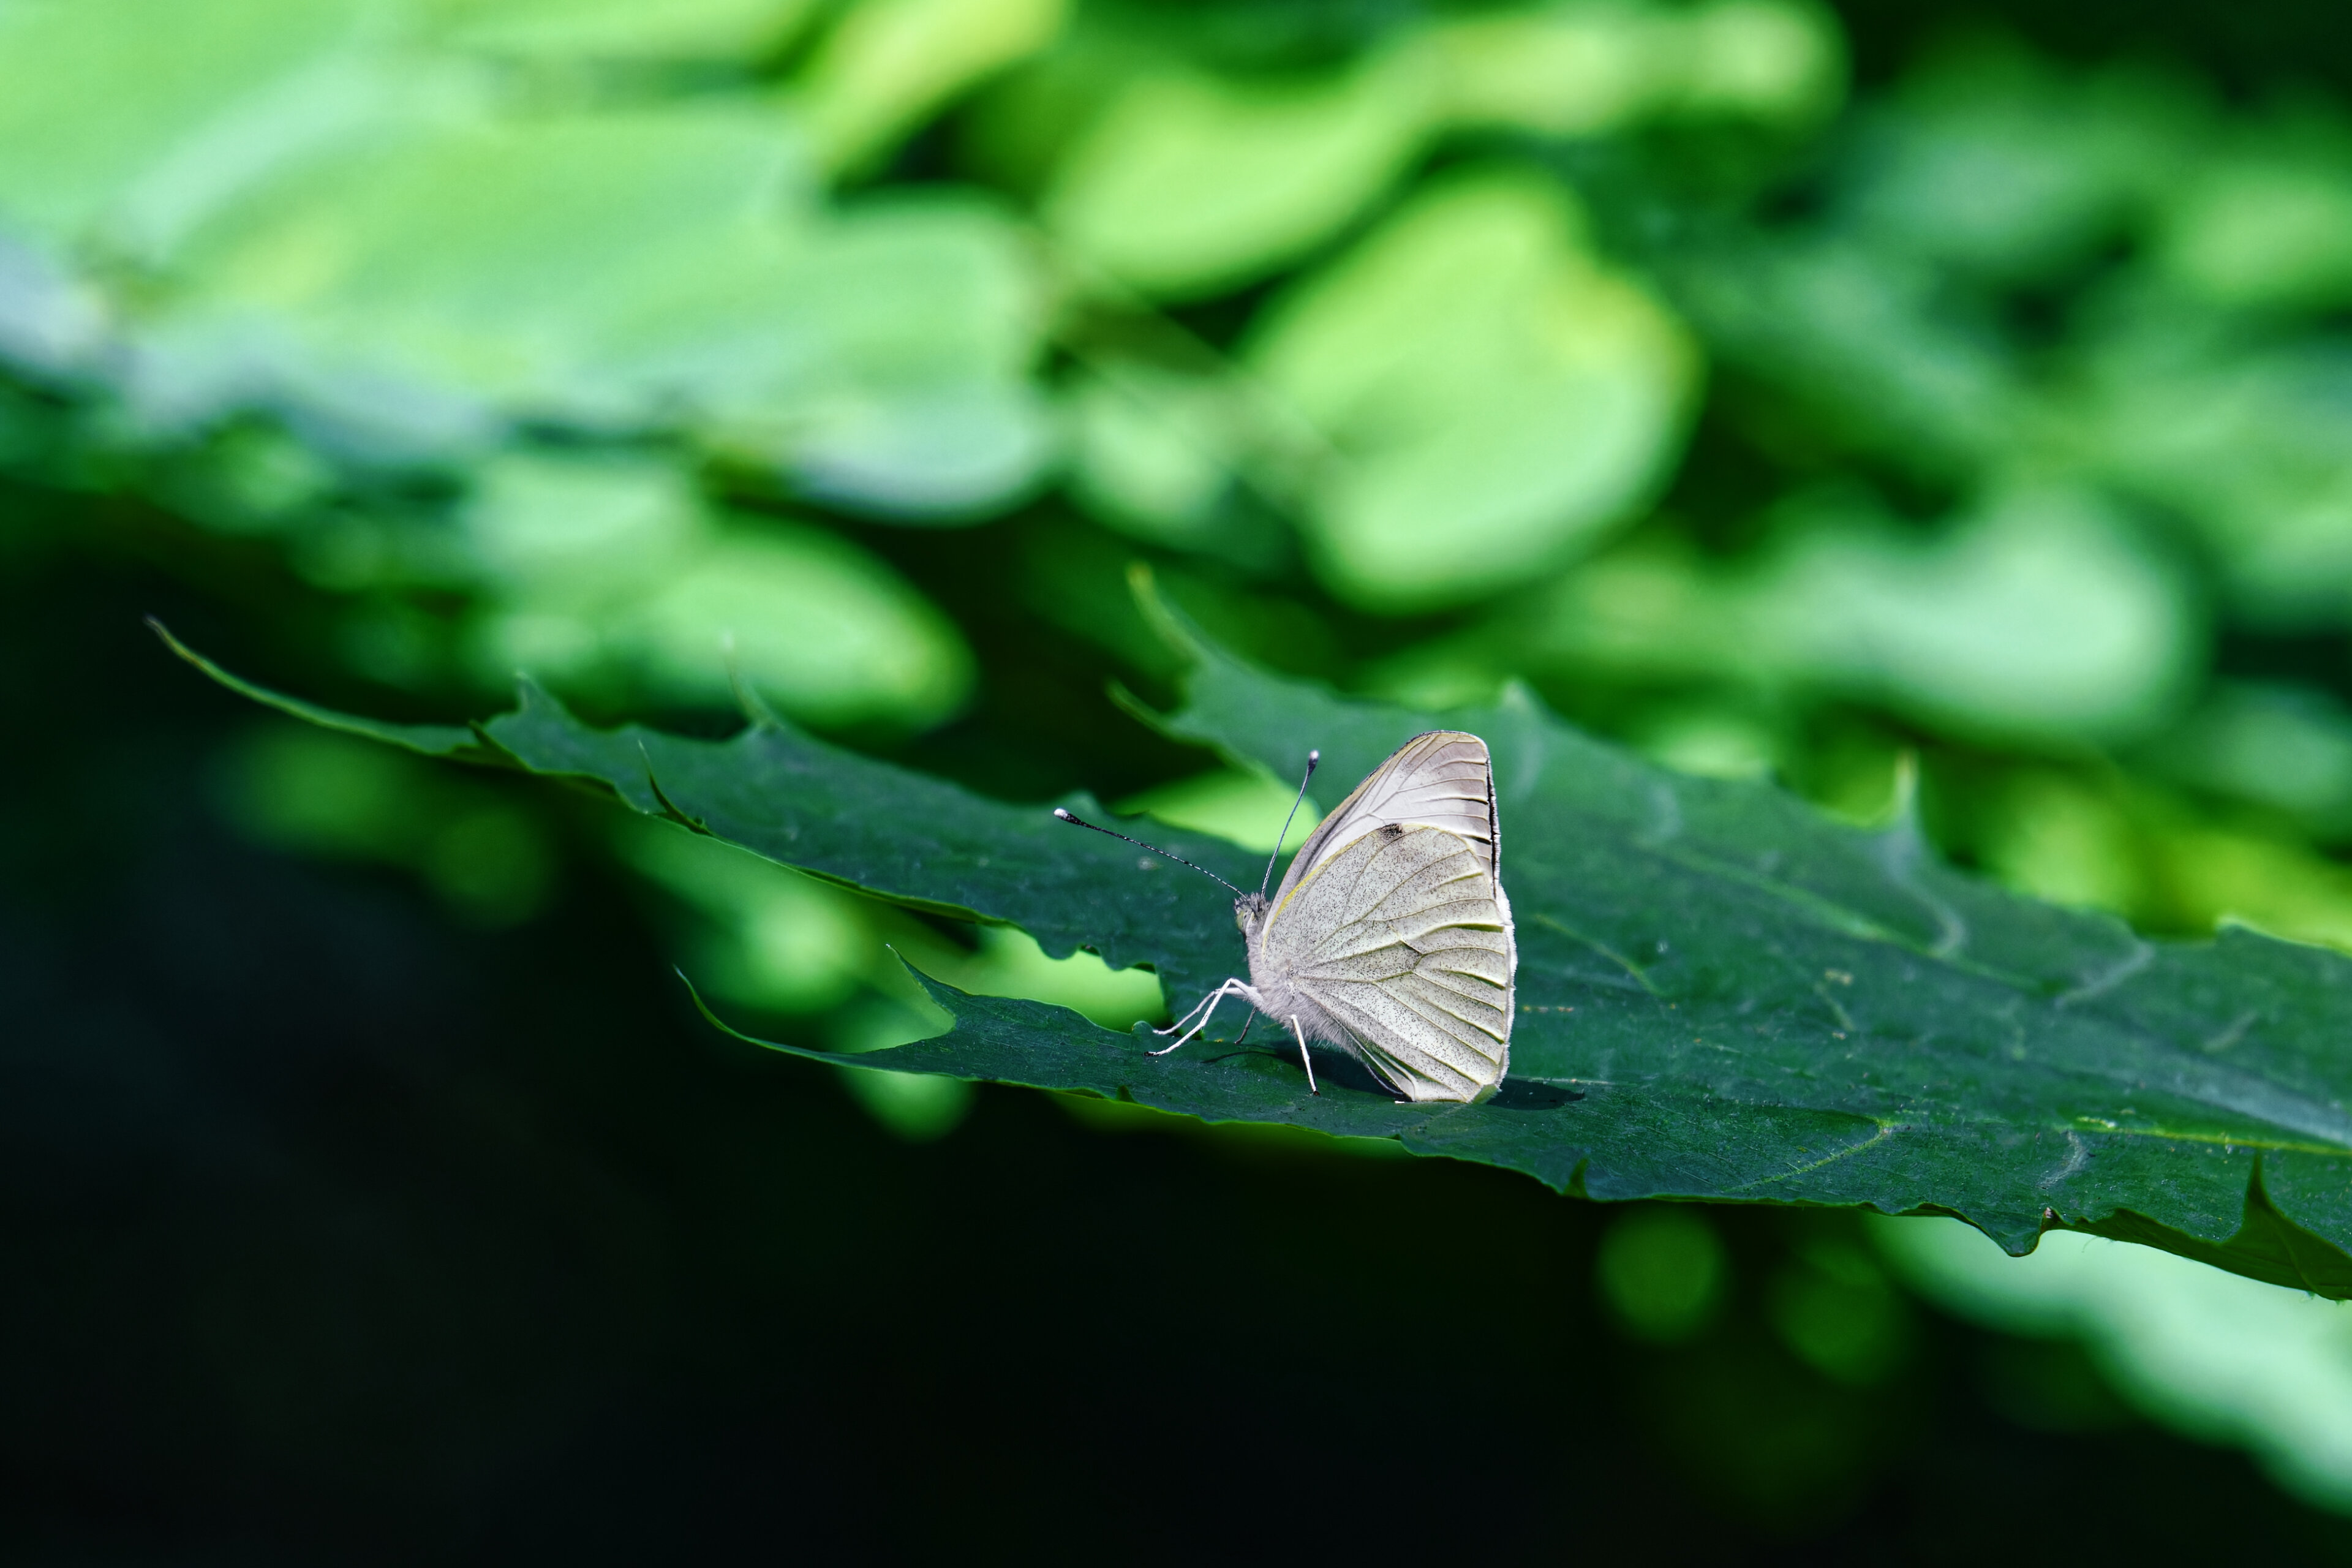 Small cabbage white butterfly sitting on leaf